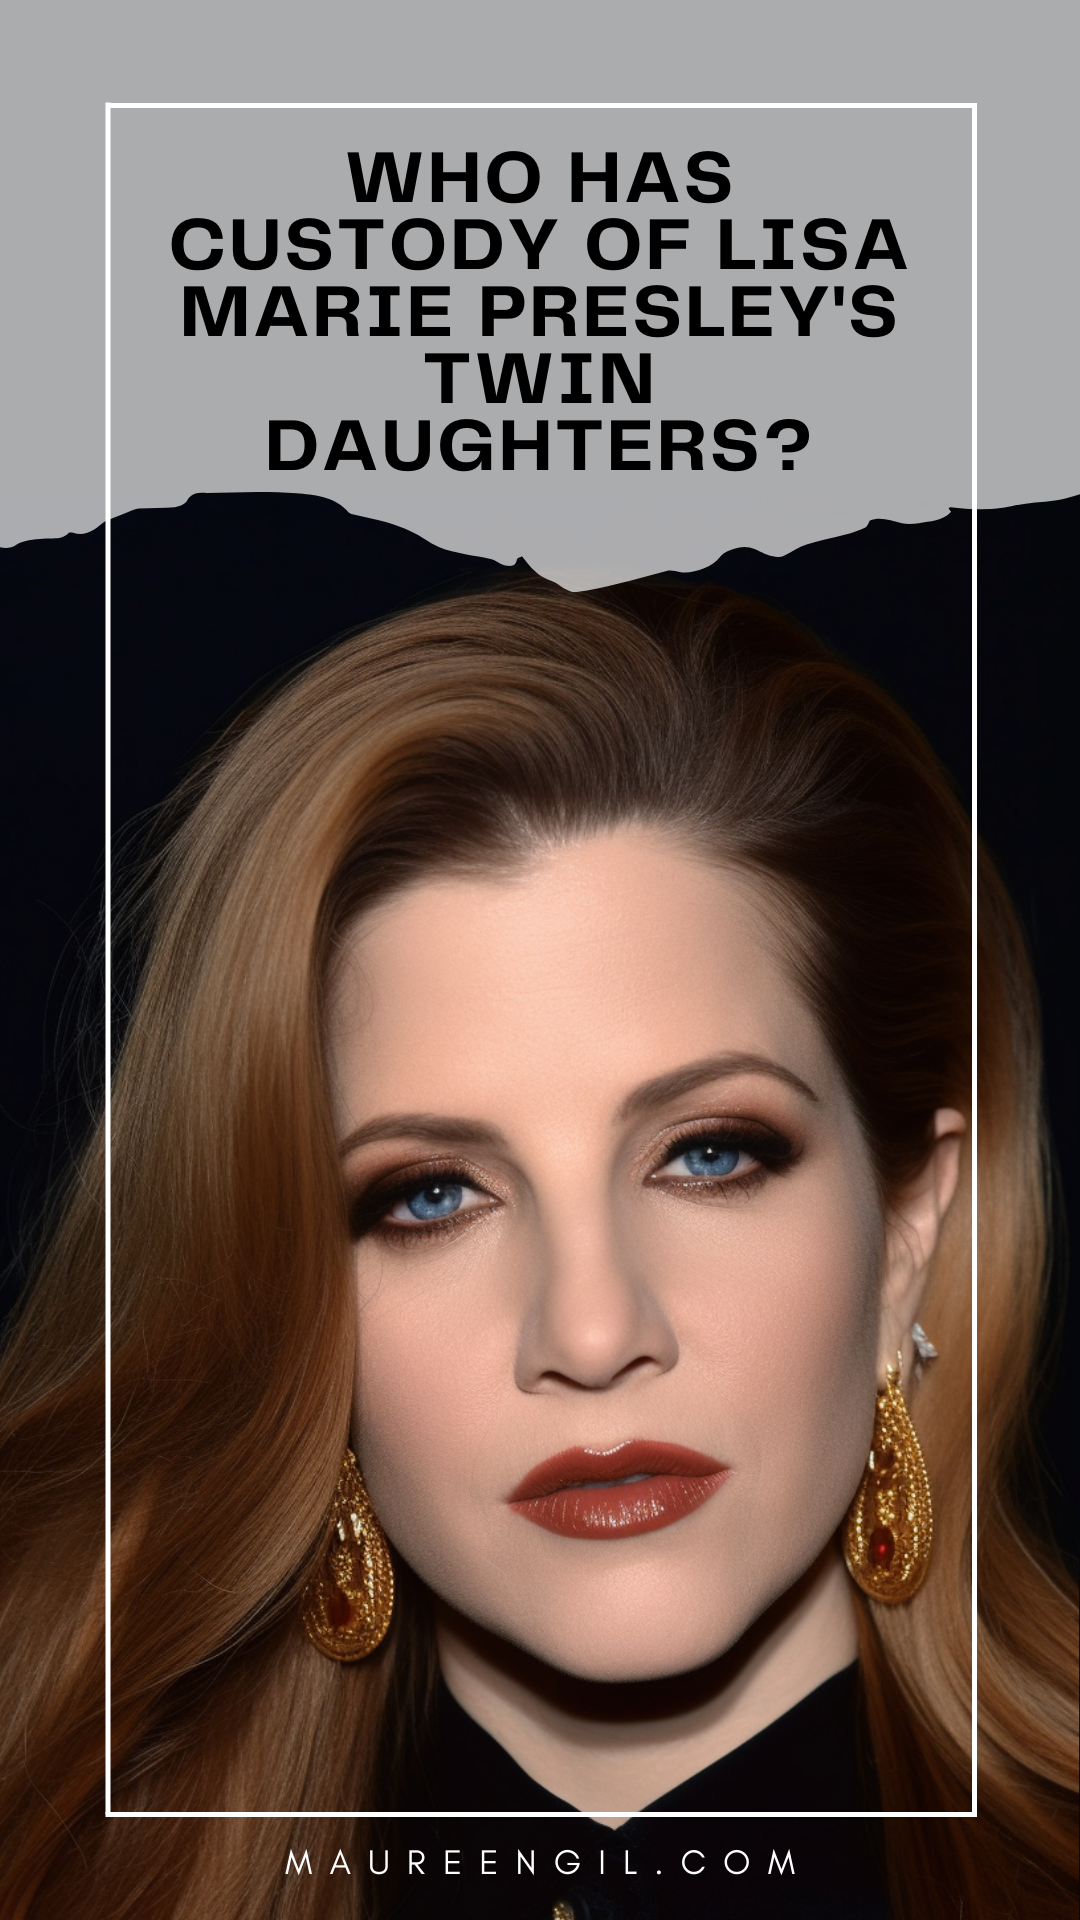 The custody battle over Lisa Marie Presley's twin daughters was contentious between their parents. Get an overview of the legal proceedings and who currently has custody after Presley's death.